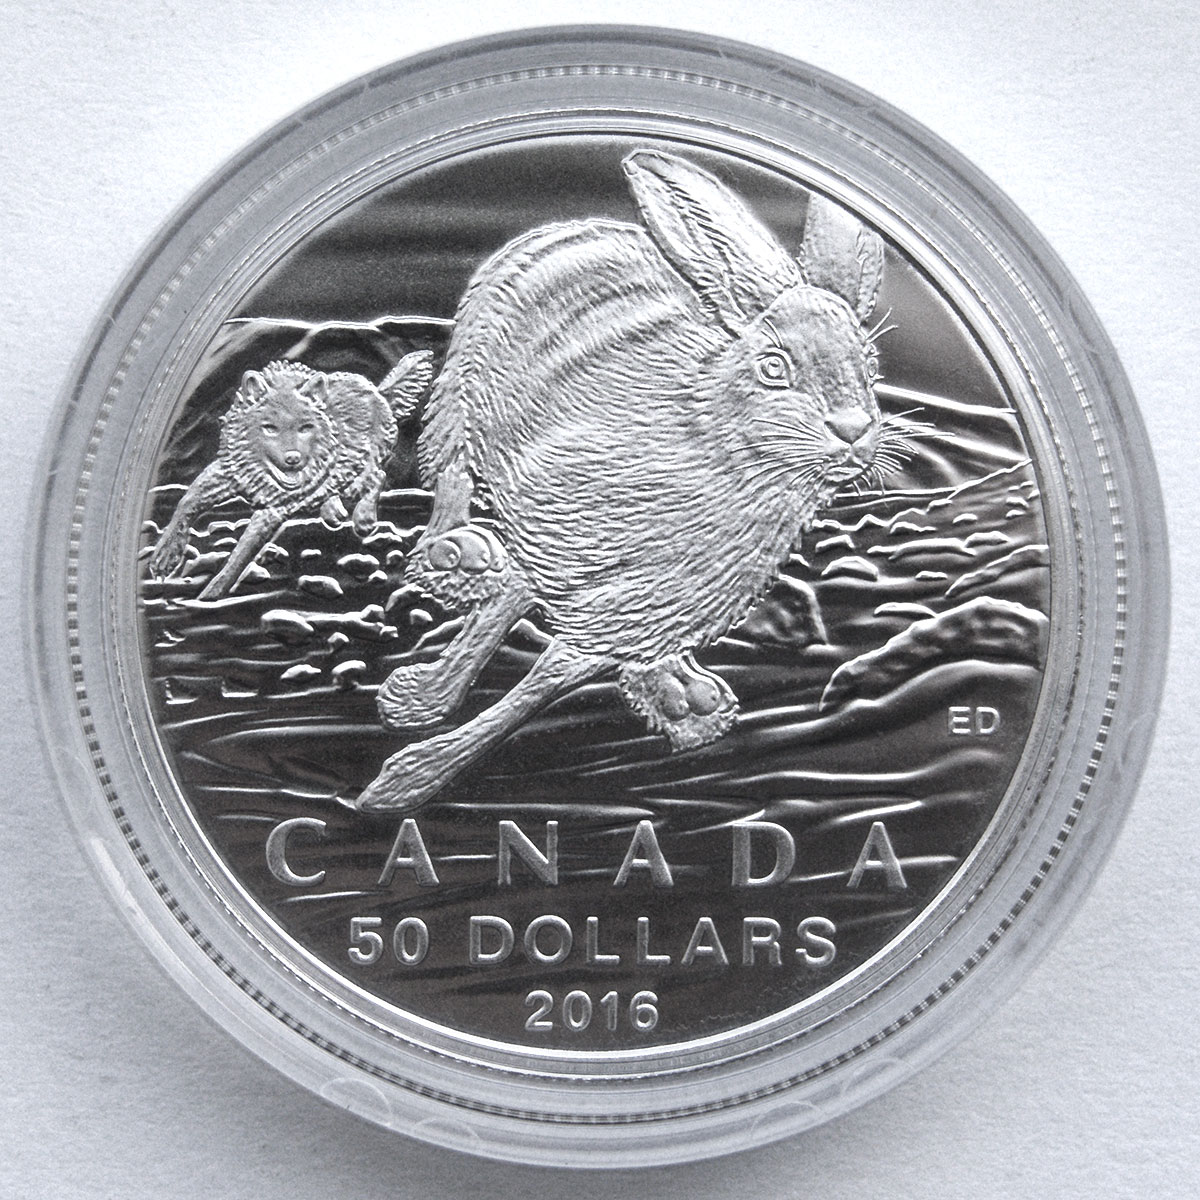 $50 for $50 Fine Silver Coin - Hare (2016) designed by Emily Damstra